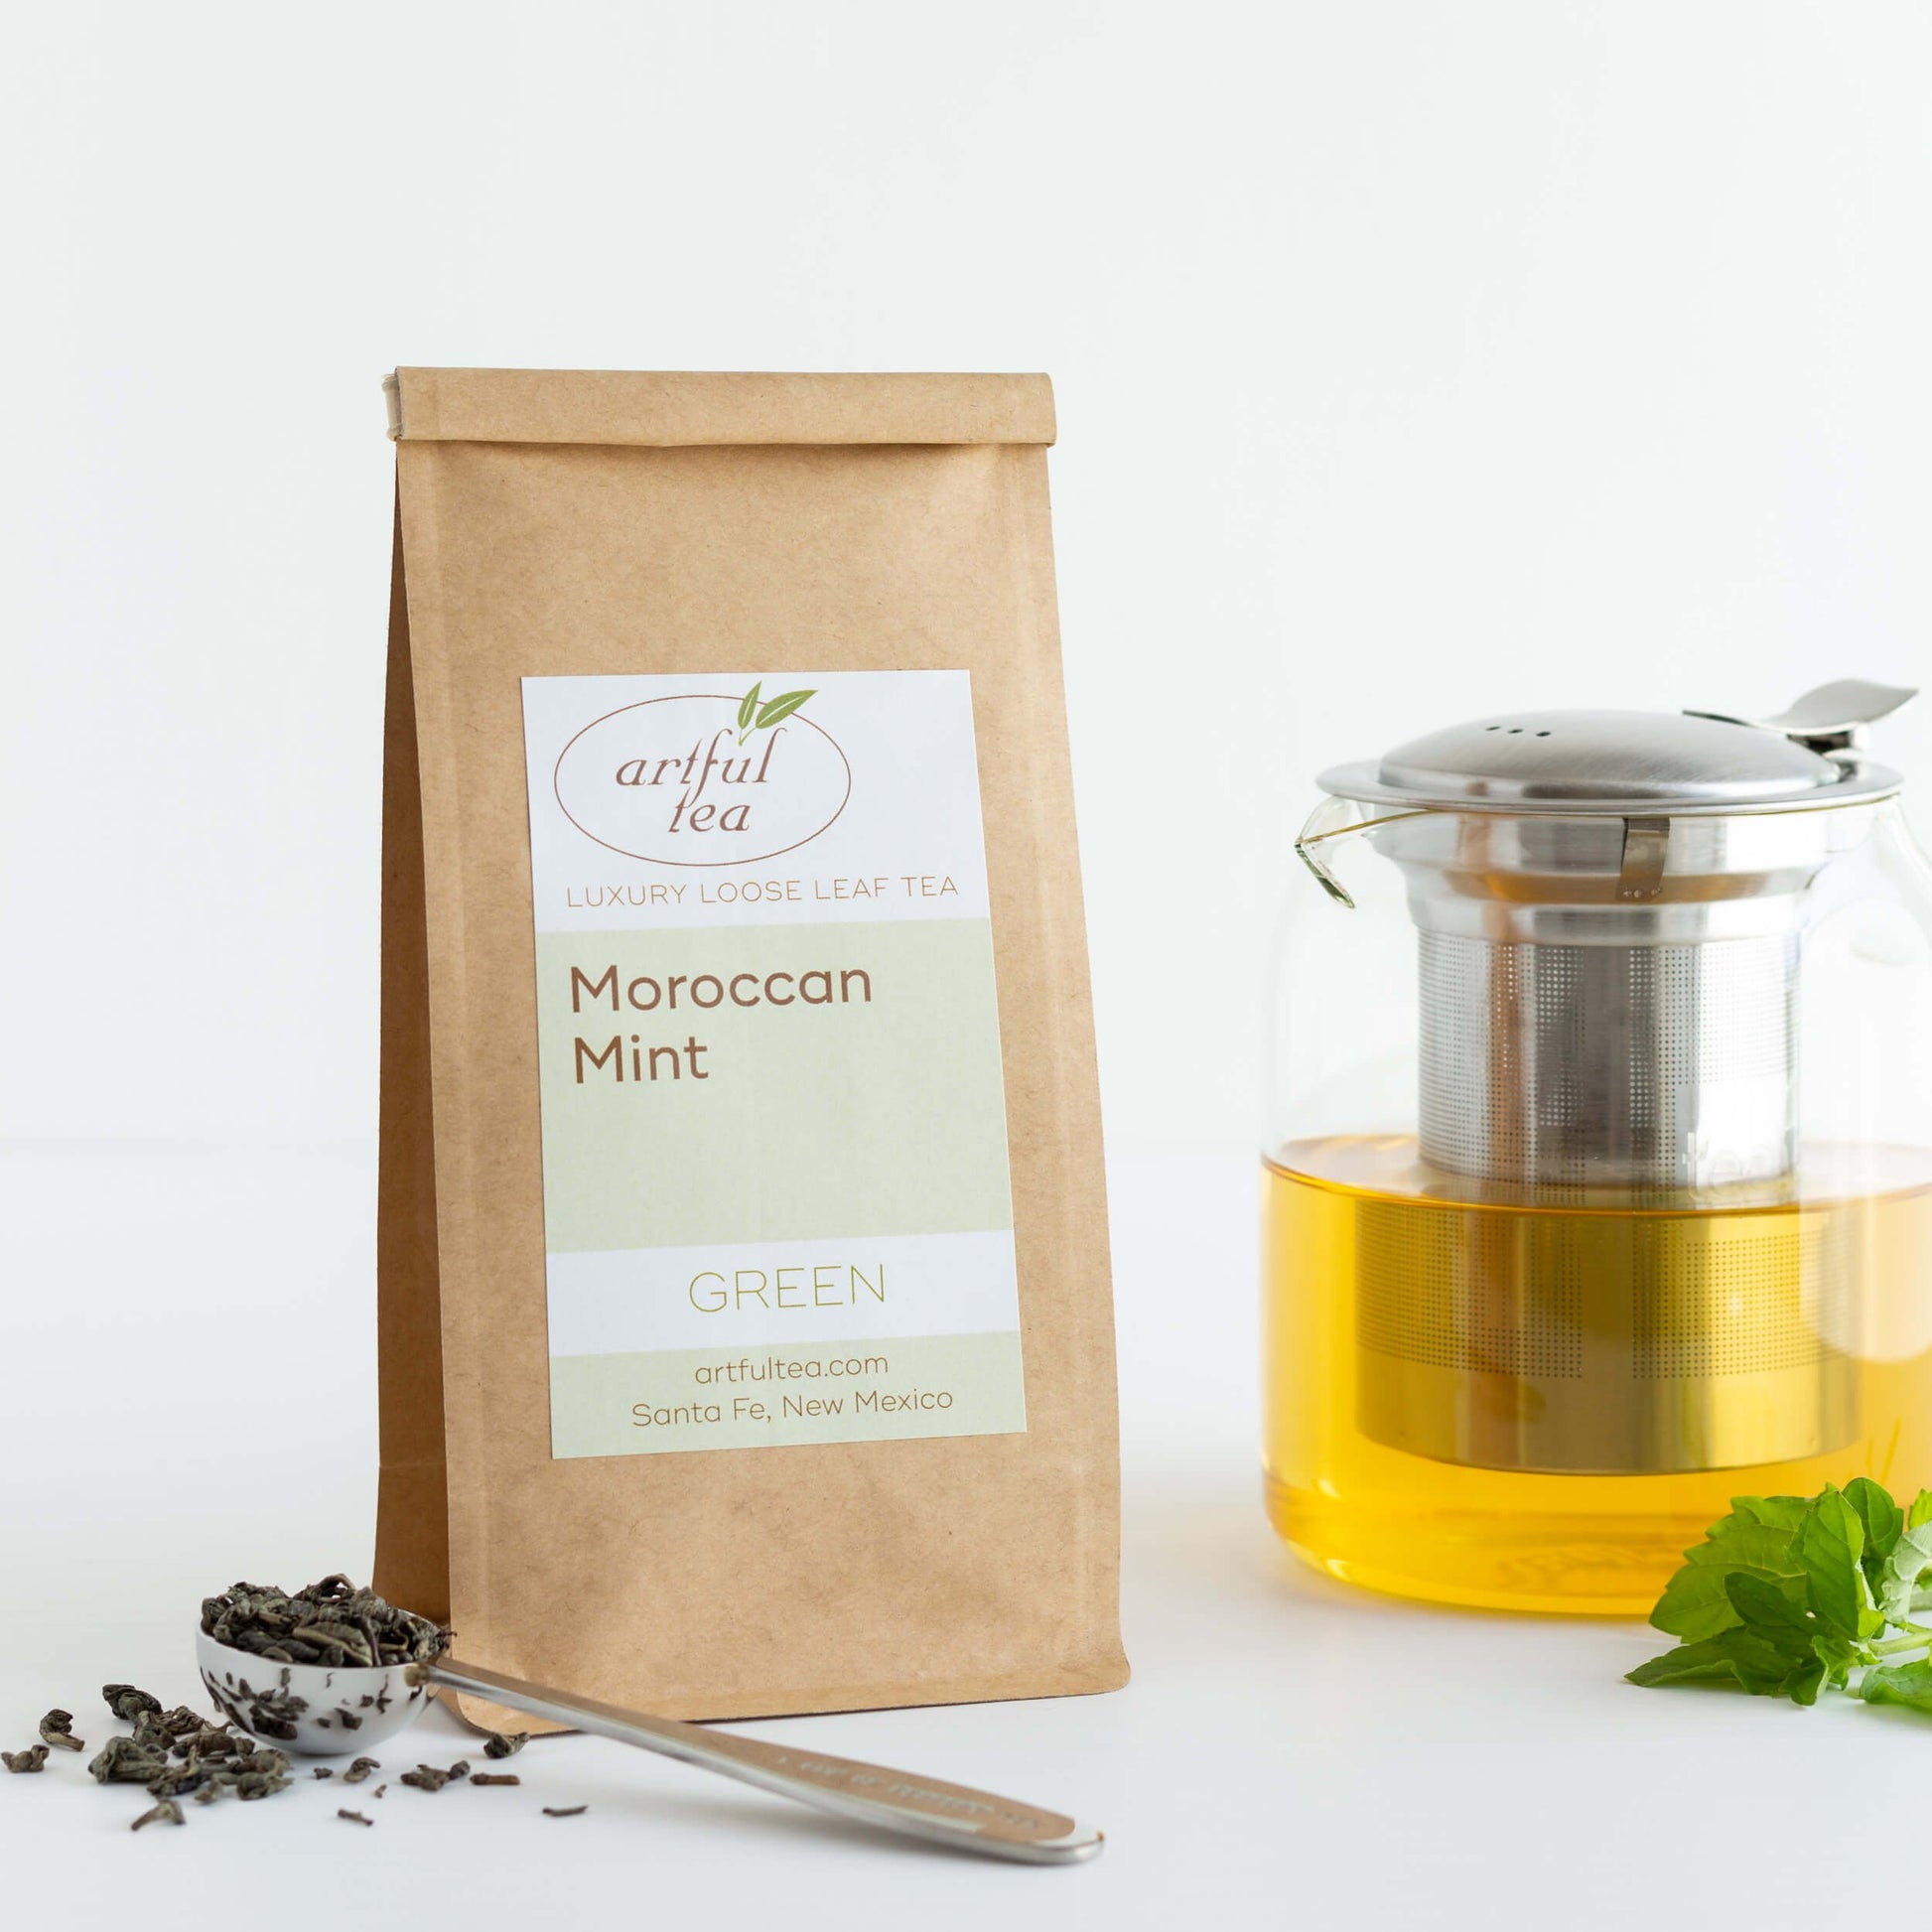 Moroccan Mint Green Tea shown packaged in a kraft bag with a scoop of loose tea leaves in the foreground. A glass teapot of brewing tea is nearby with some mint leaves next to it